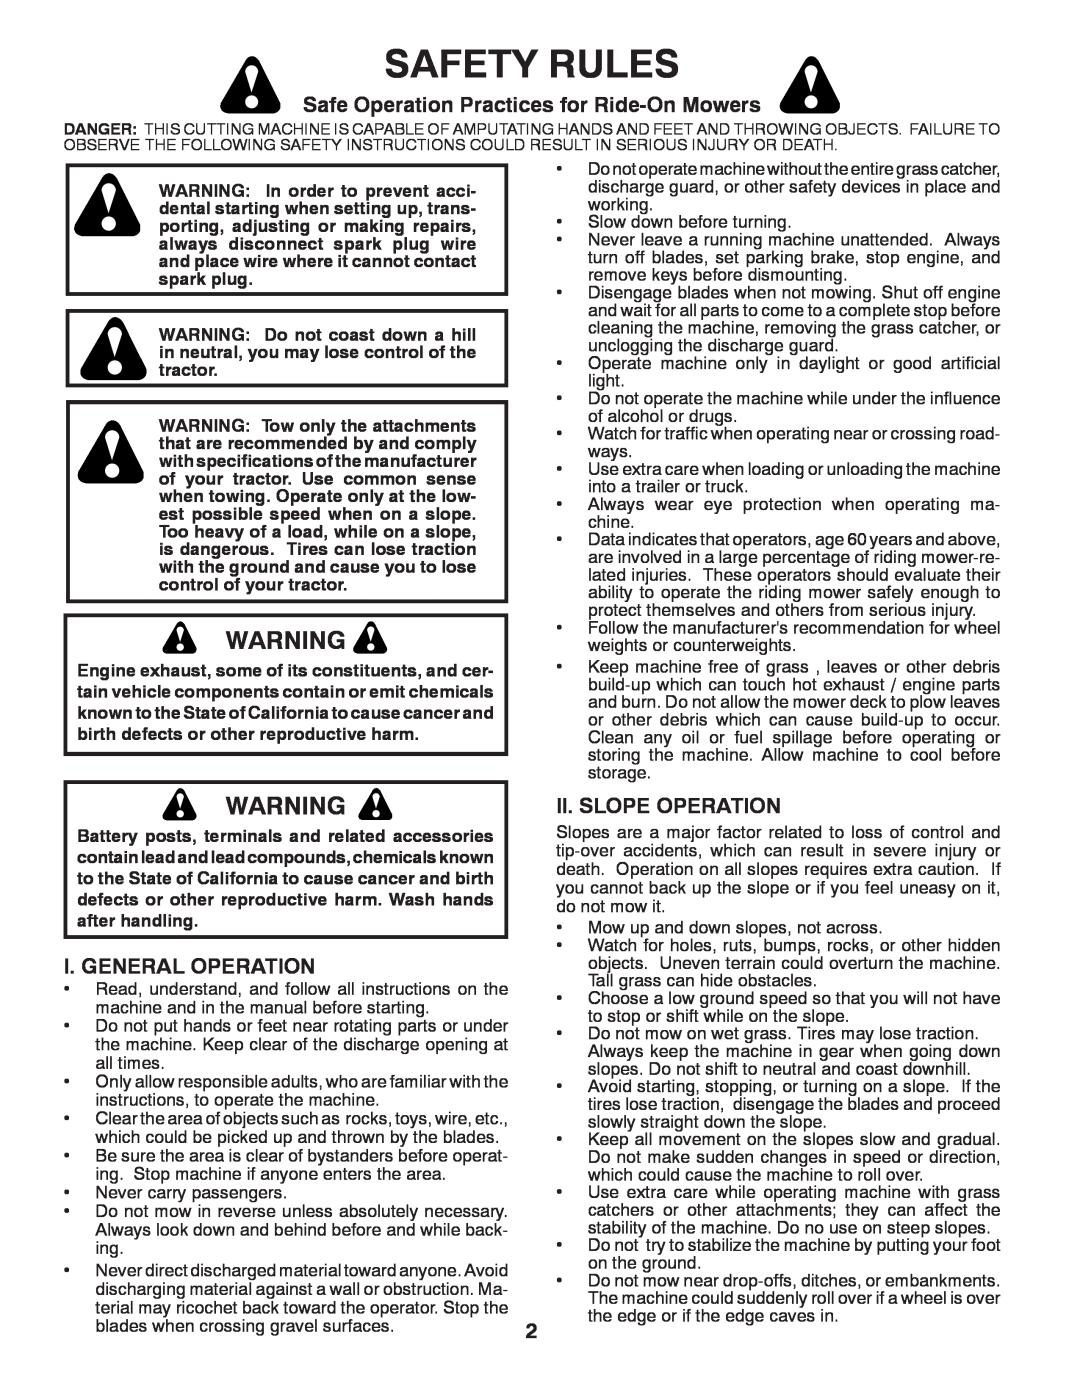 McCulloch M19542H Safety Rules, Safe Operation Practices for Ride-OnMowers, I. General Operation, Ii. Slope Operation 